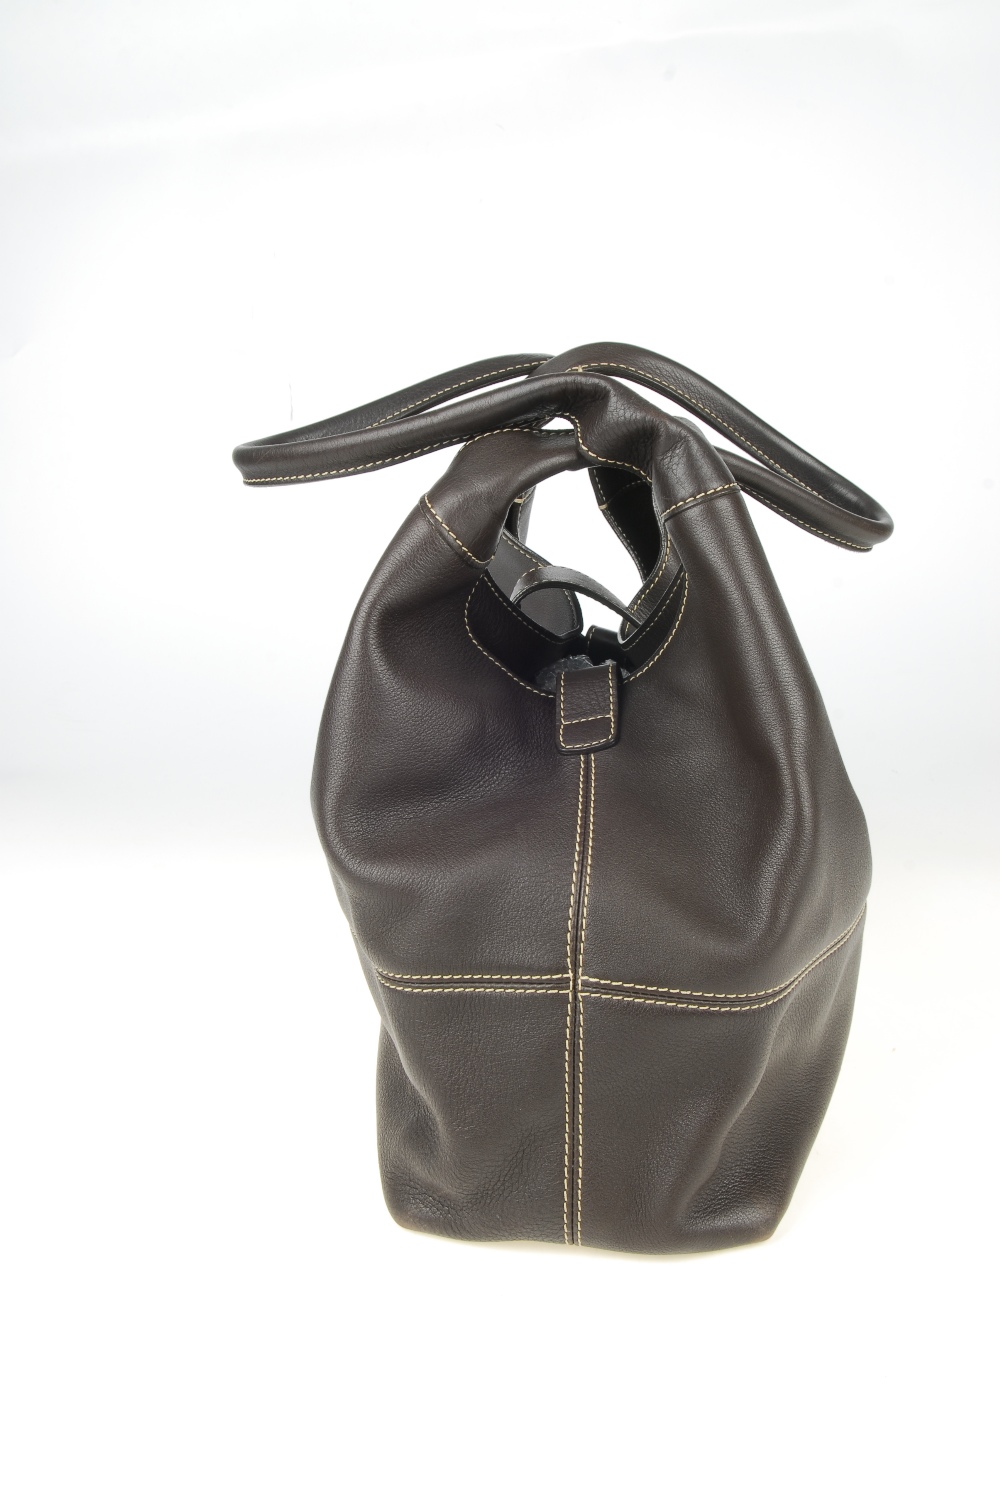 LORO PIANA - a brown leather hobo handbag. Designed from lightly grained dark brown leather with - Bild 5 aus 12